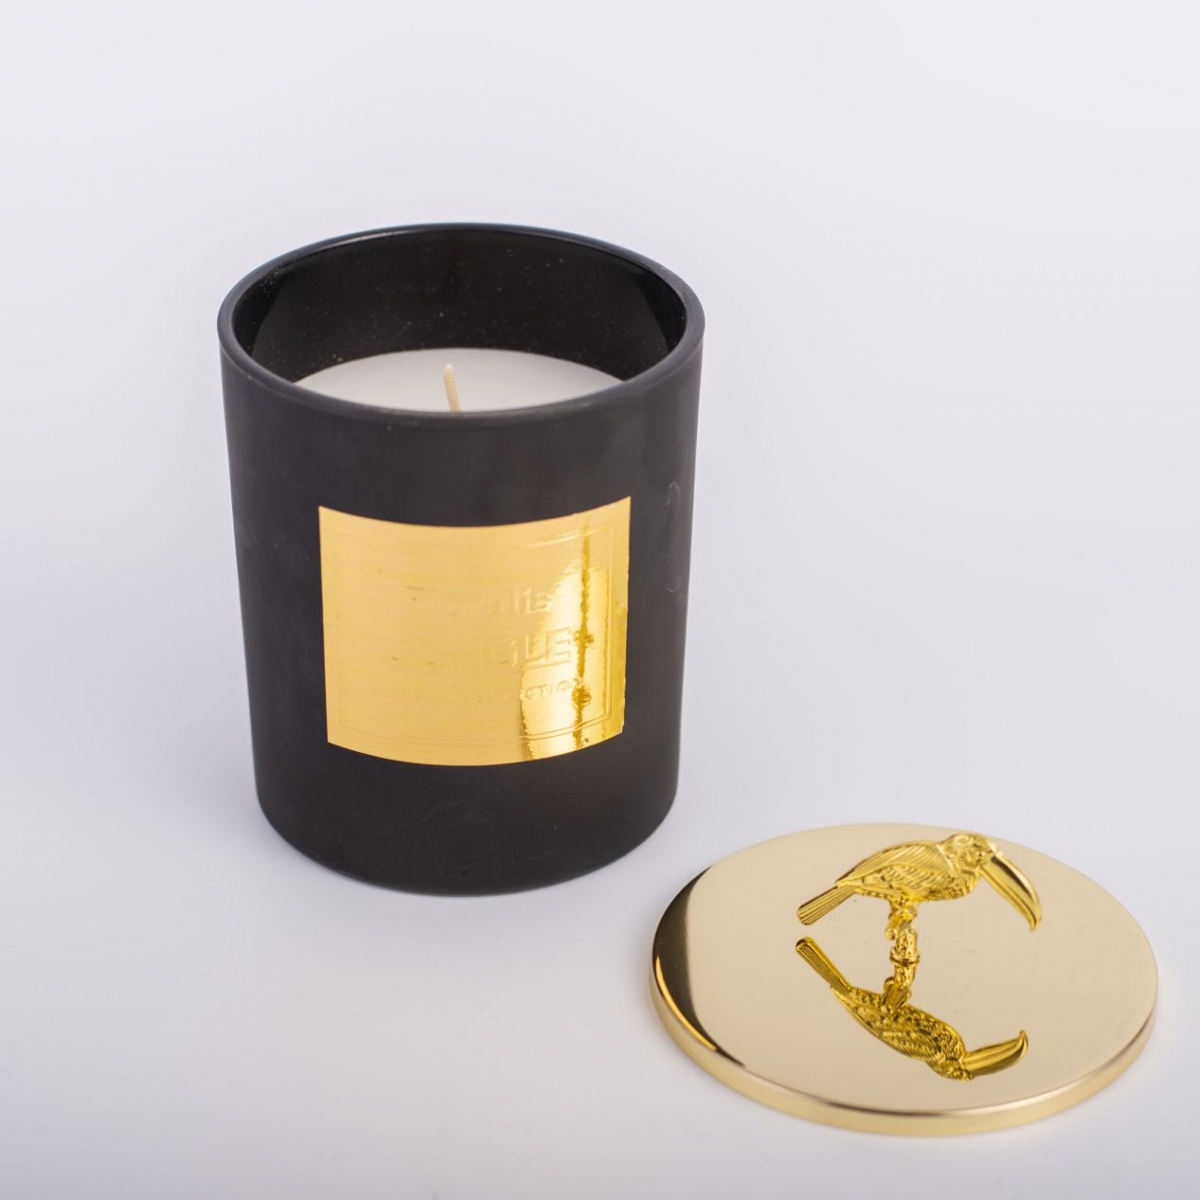 Scented Candles -Best Soy Candles ,Luxury Candles ,Vegan Candles ,Black Glass Jar ,Gold Toucans Metal Lid ,Aromatherapy ,China Factory ,Price-HOWCANDLE-Candles,Scented Candles,Aromatherapy Candles,Soy Candles,Vegan Candles,Jar Candles,Pillar Candles,Candle Gift Sets,Essential Oils,Reed Diffuser,Candle Holder,